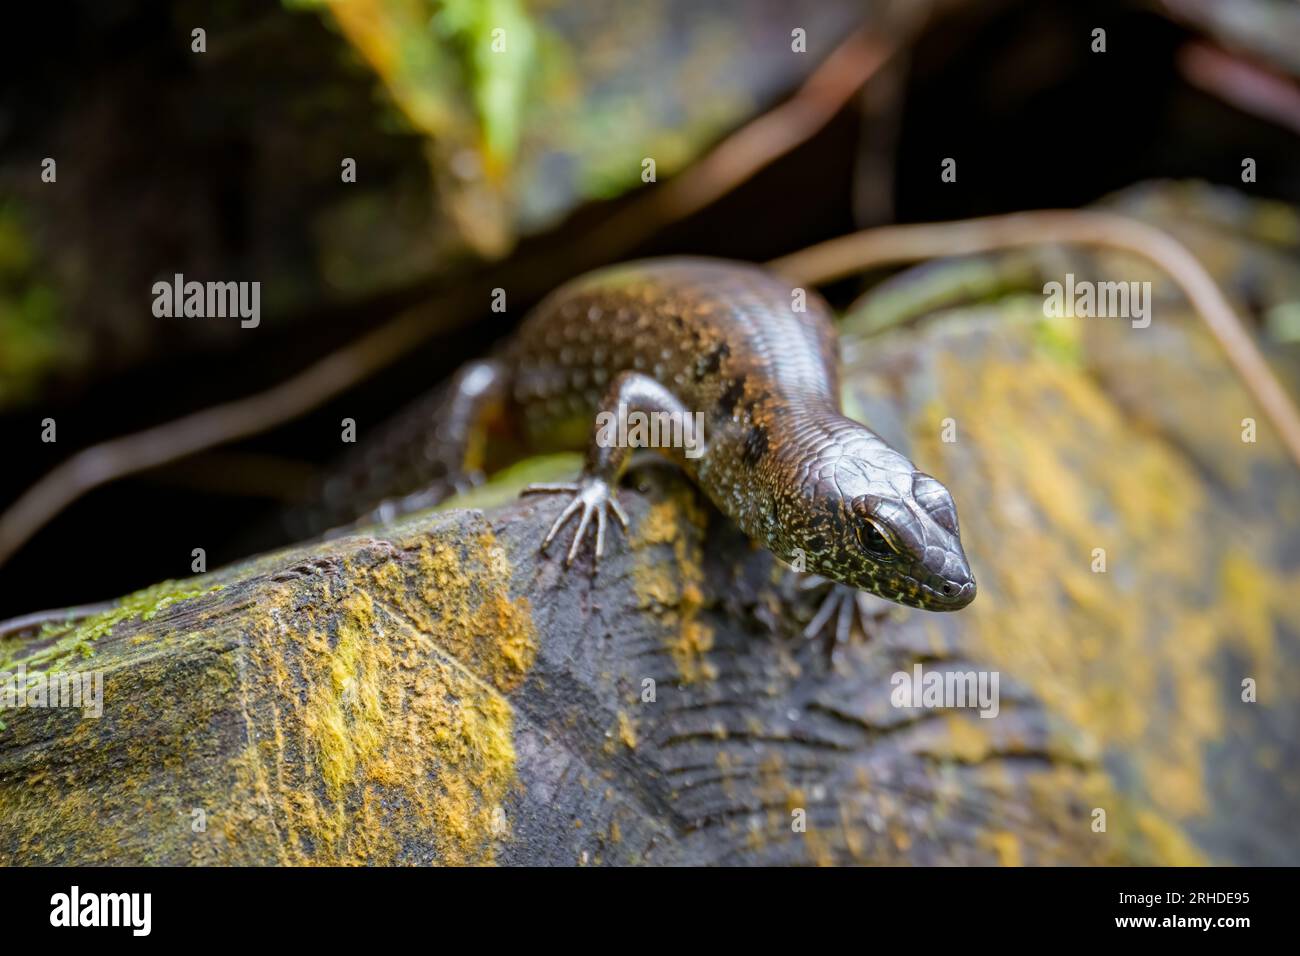 Blotched Forest Skink (Sphenomorphus praesignis) on mossy wood. Spotted lizard in Fraser's Hill forest, Malaysia. A species of lizard in the family Sc Stock Photo